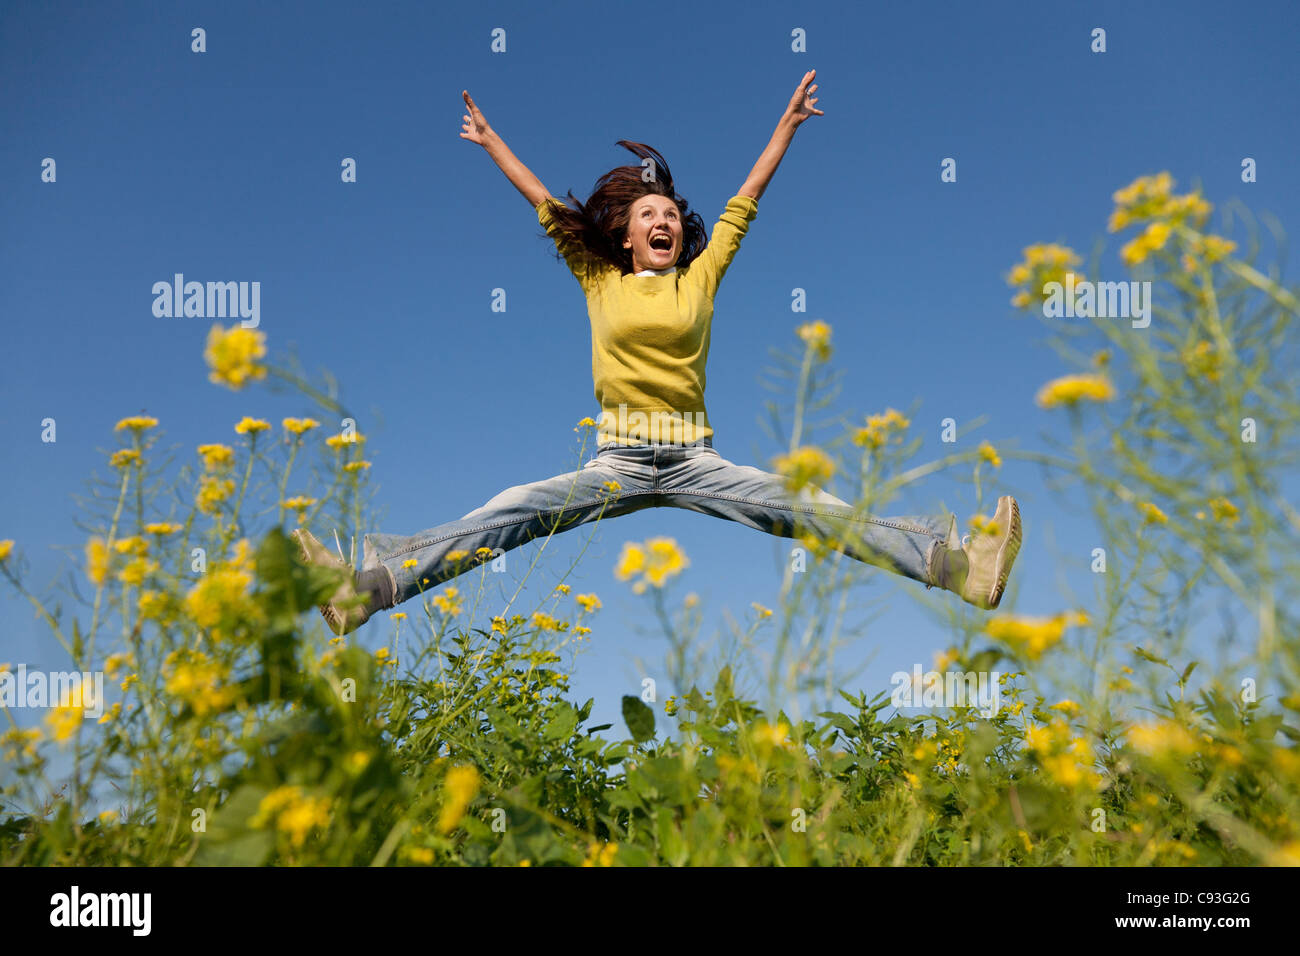 Happy and beautiful young girl jumping high in a summer field Stock Photo